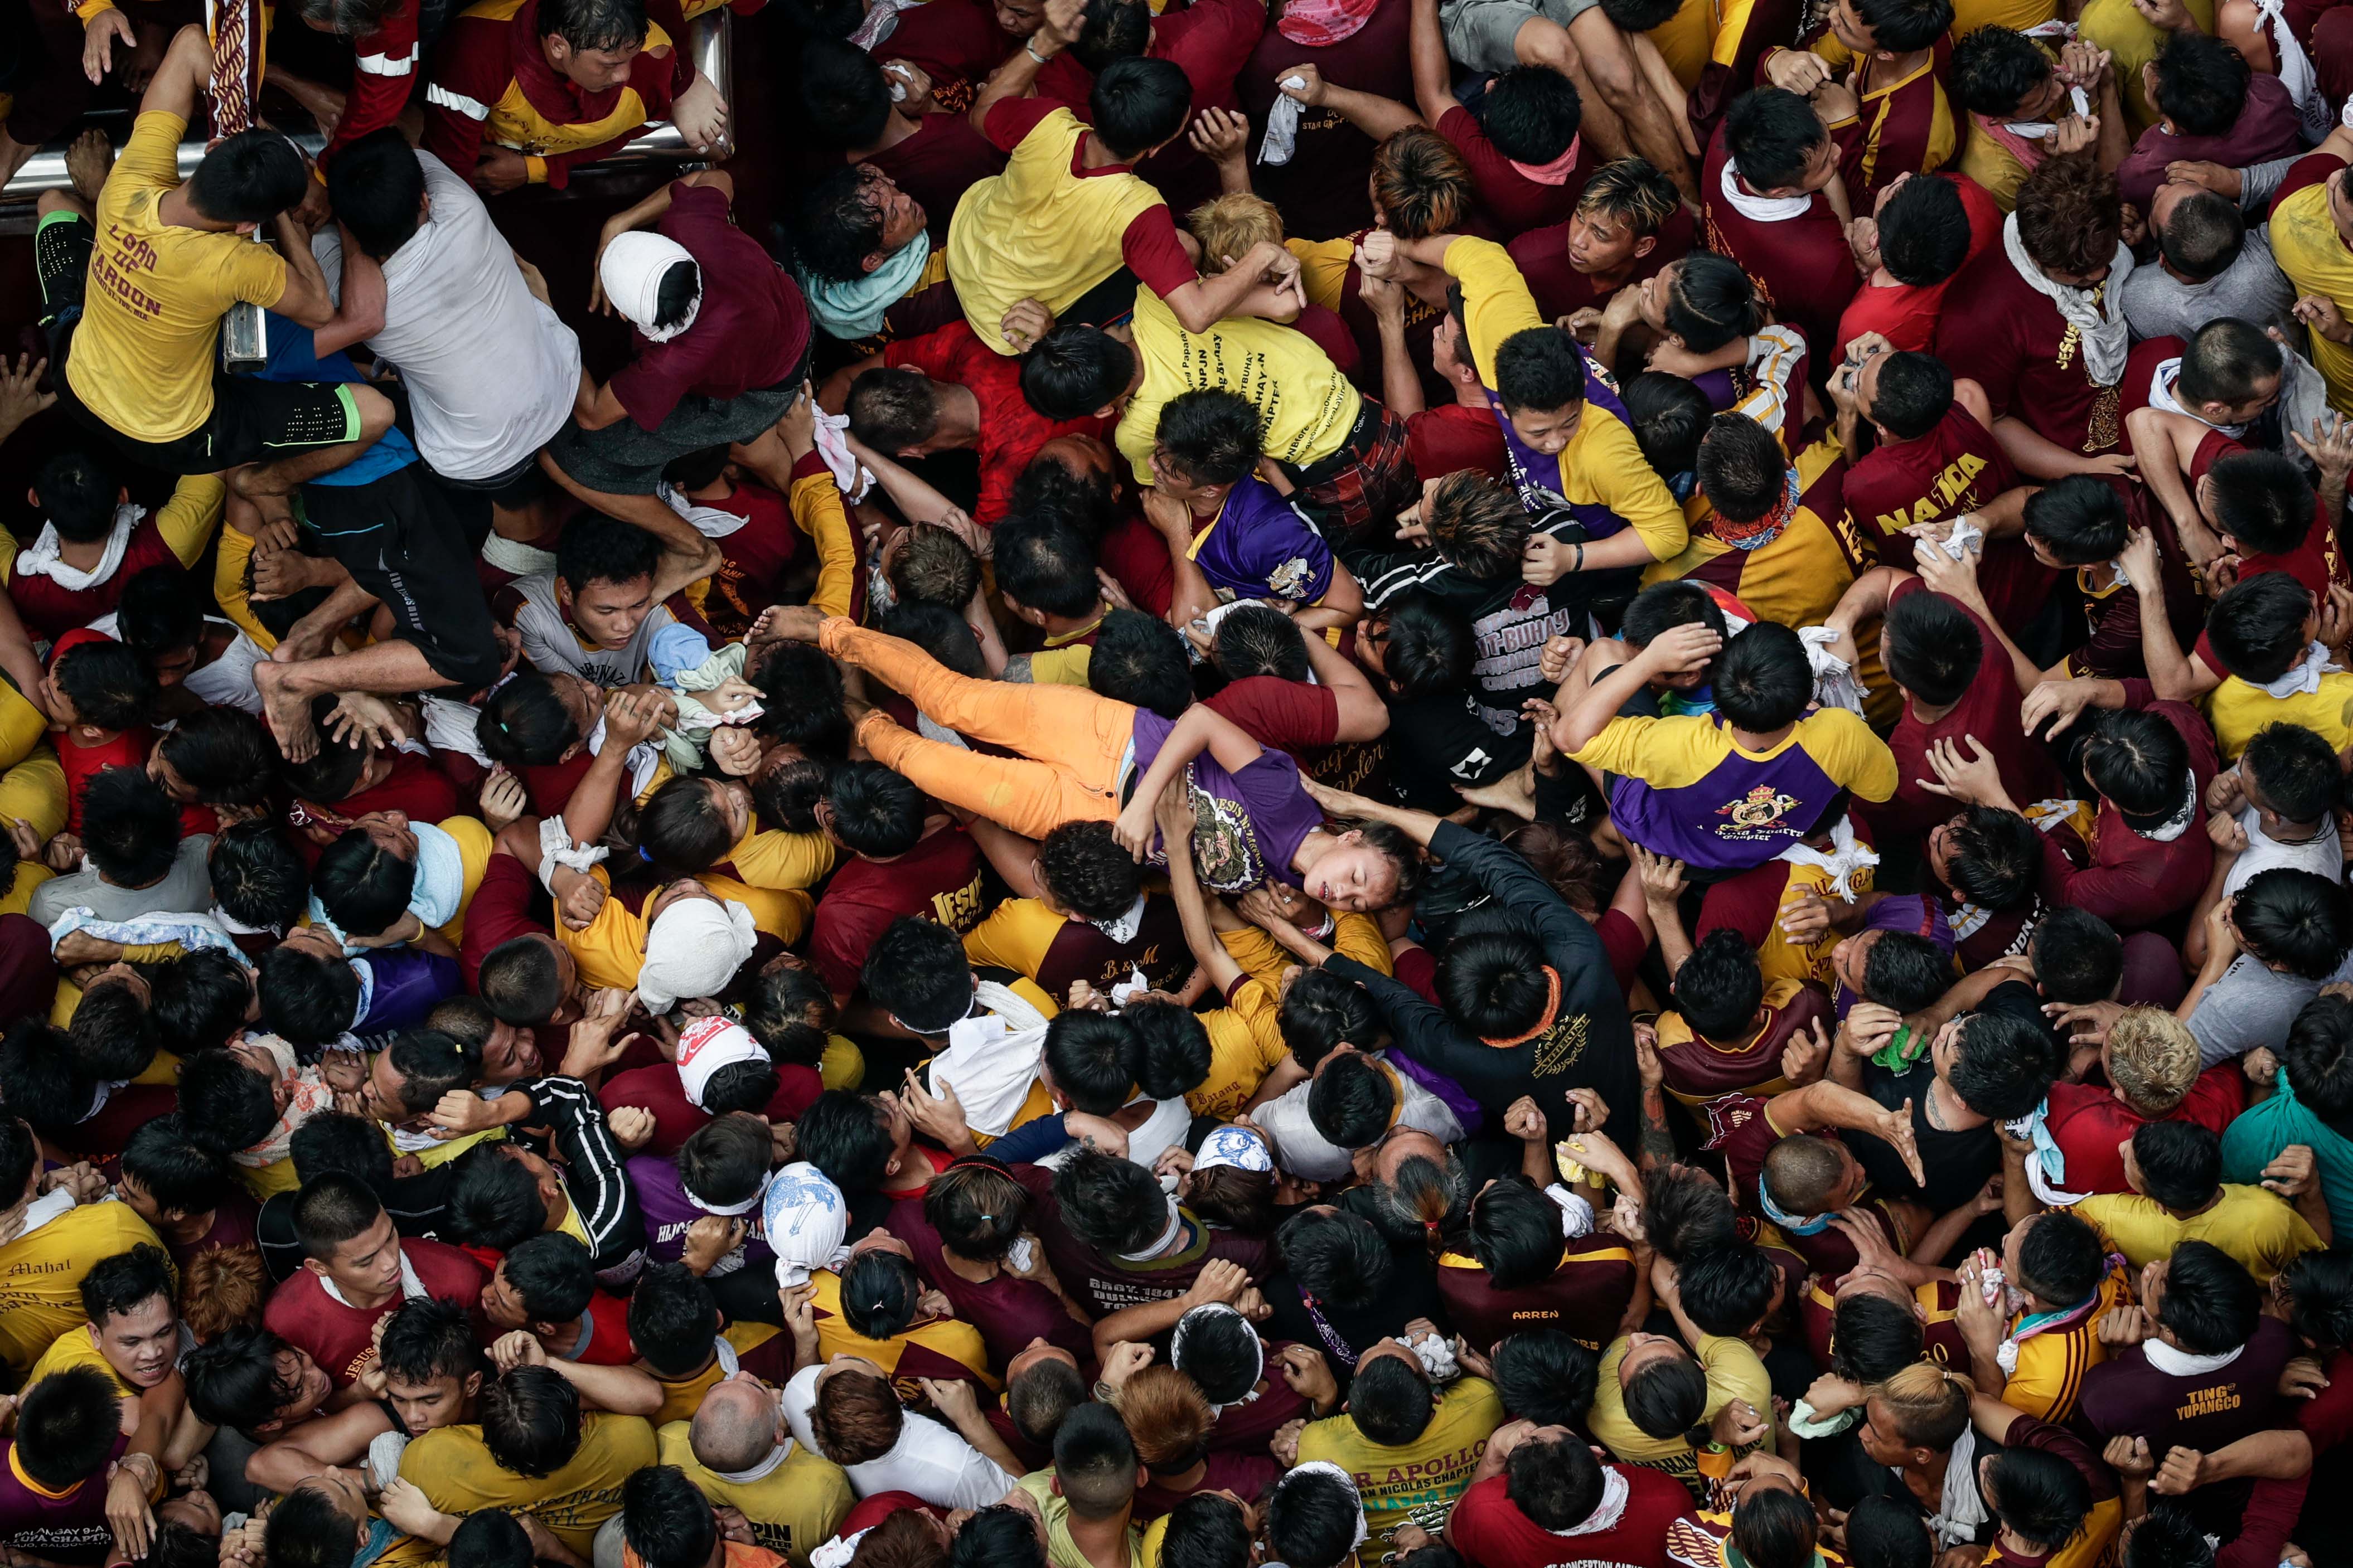 A woman is carried off by a crowd of devotees near the statue of the Black Nazarene during the procession at the Jones Bridge in Manila on Jan. 9, 2017 (Mark R. Cristino—EPA)